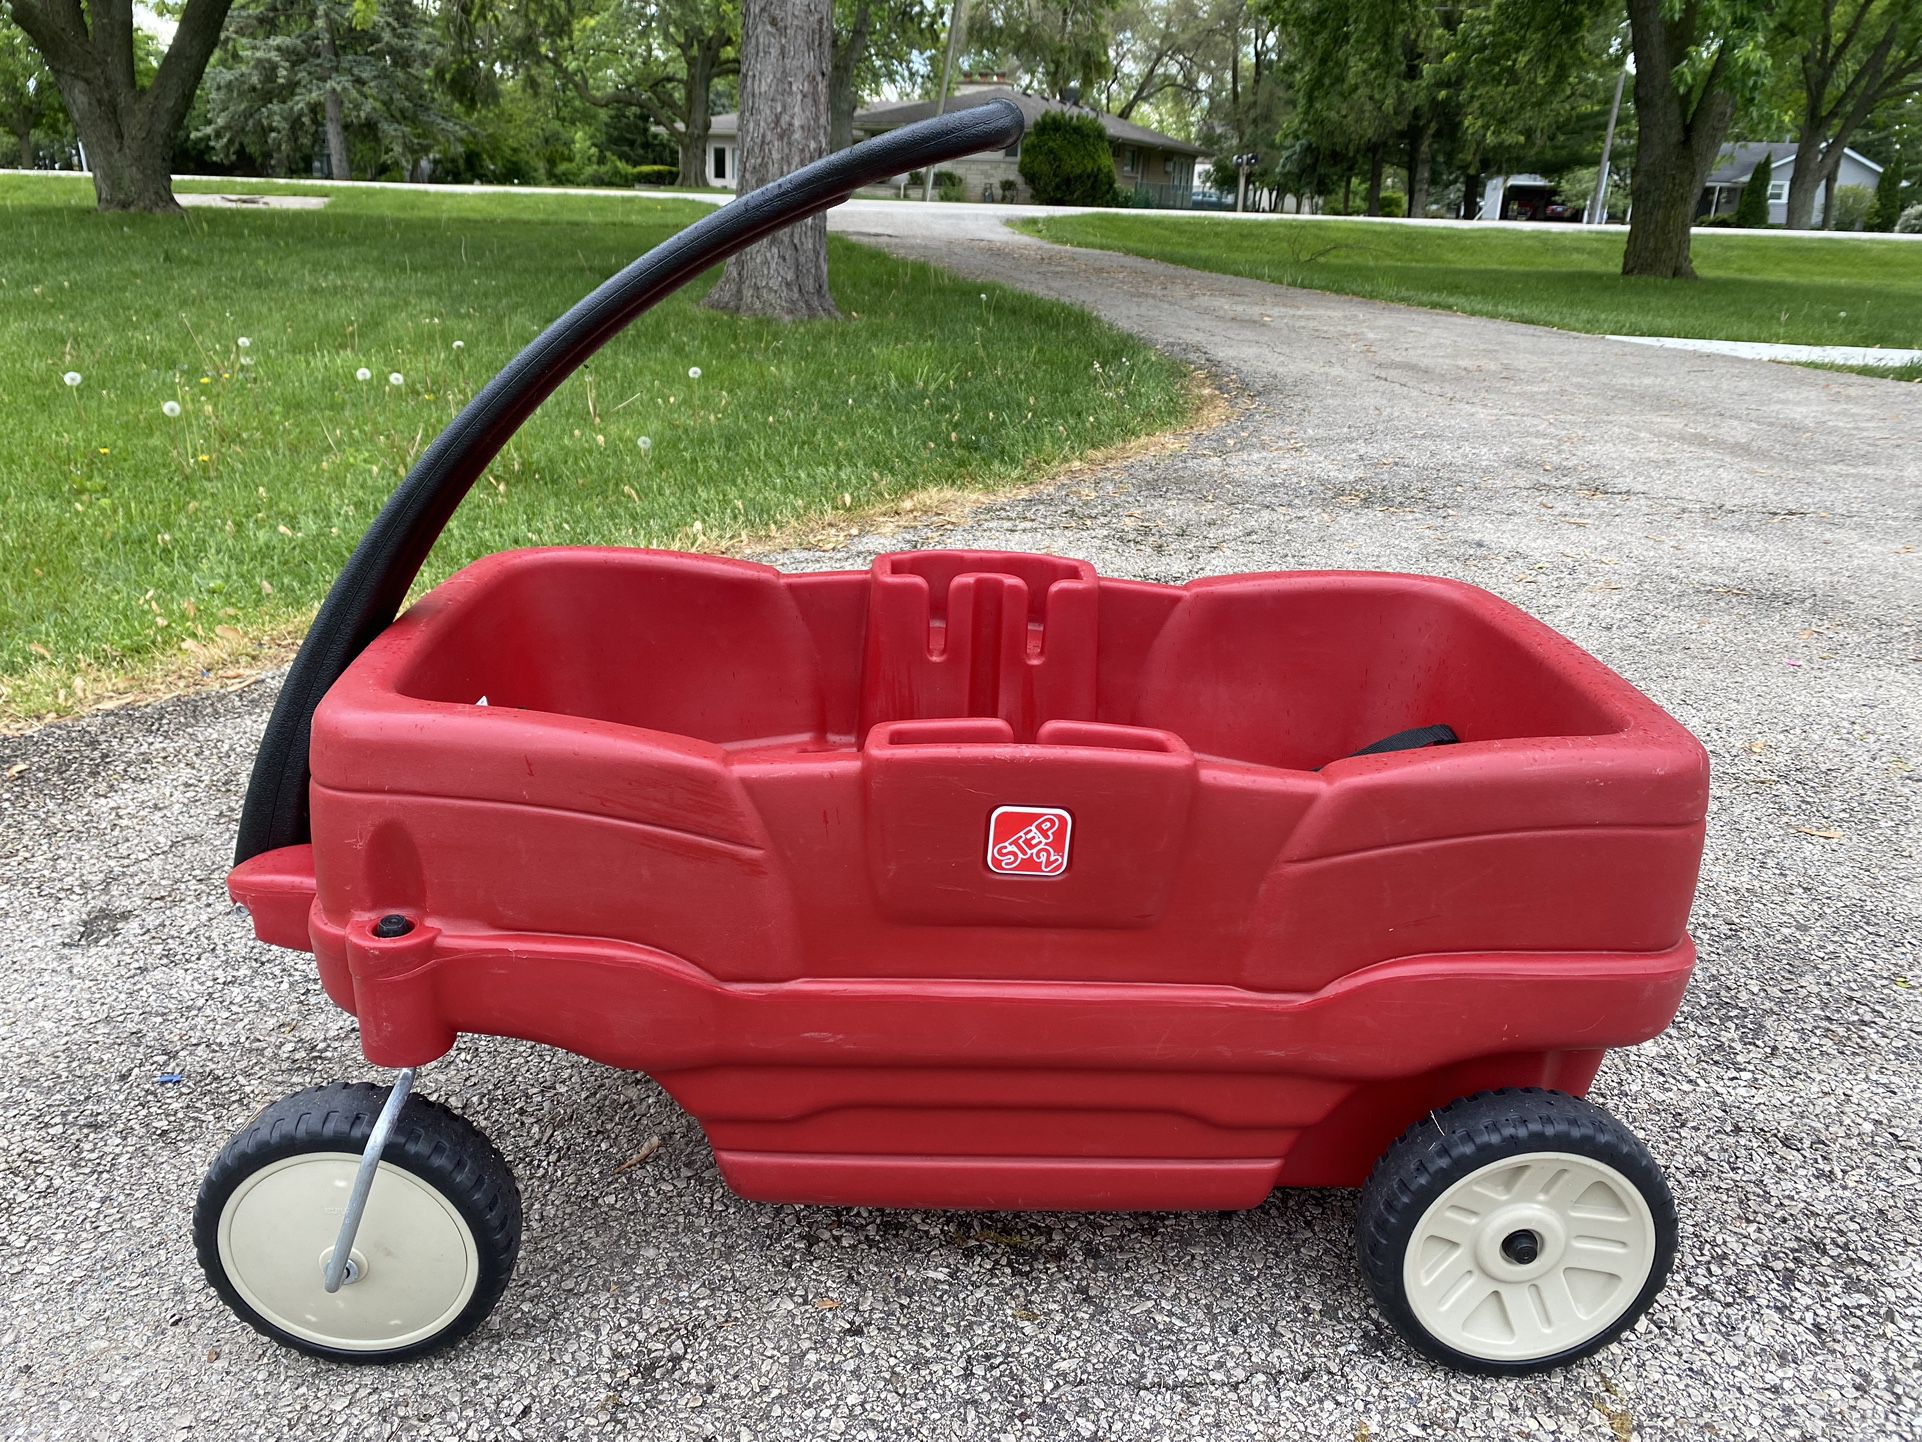 Red kids Step2 wagon for 2 used-normal cosmetic wear